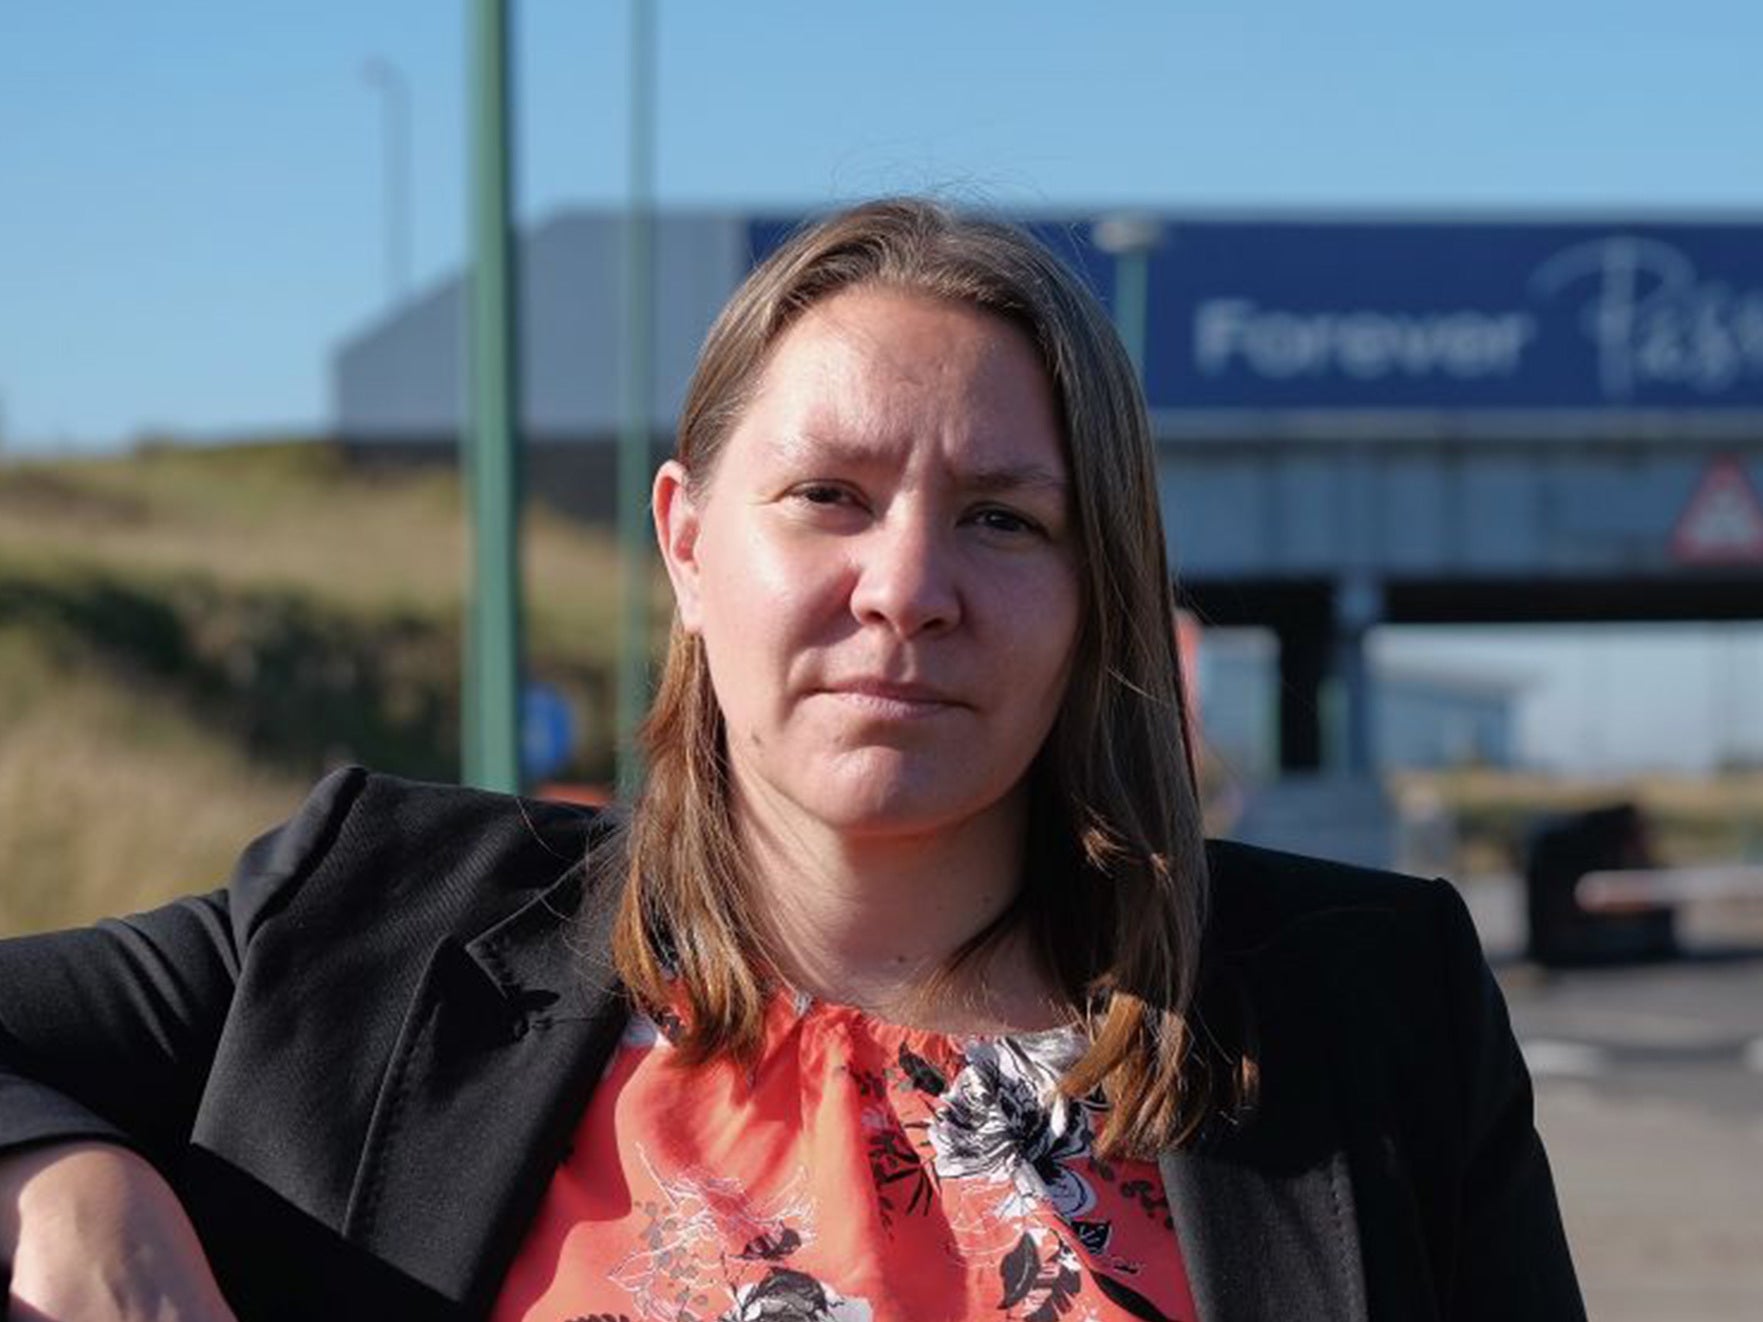 Labour MP for Redcar Anna Turley is pictured outside the main entrance to the SSI UK steel plant after discussions about the closure of the site with the company